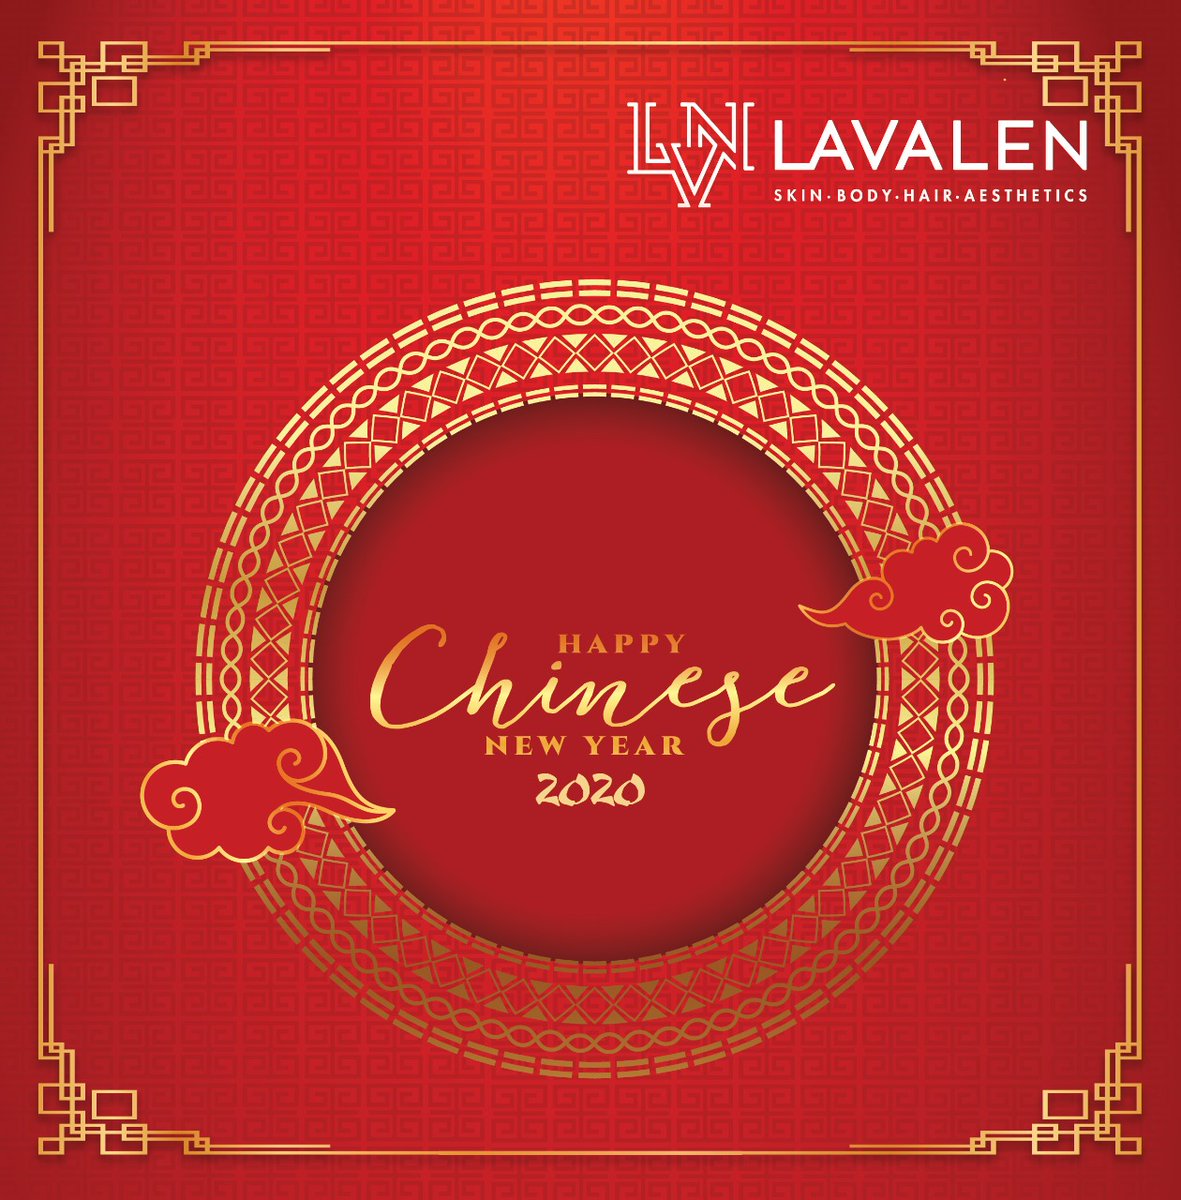 Happy Lunar New Year🎊

May this rat year brings good fortune, health, wealth, and full of happiness

Have a prosperous year ahead!

#lavalen #cnyedition #lunarnewyear #beautyclinic #perawatantubuh